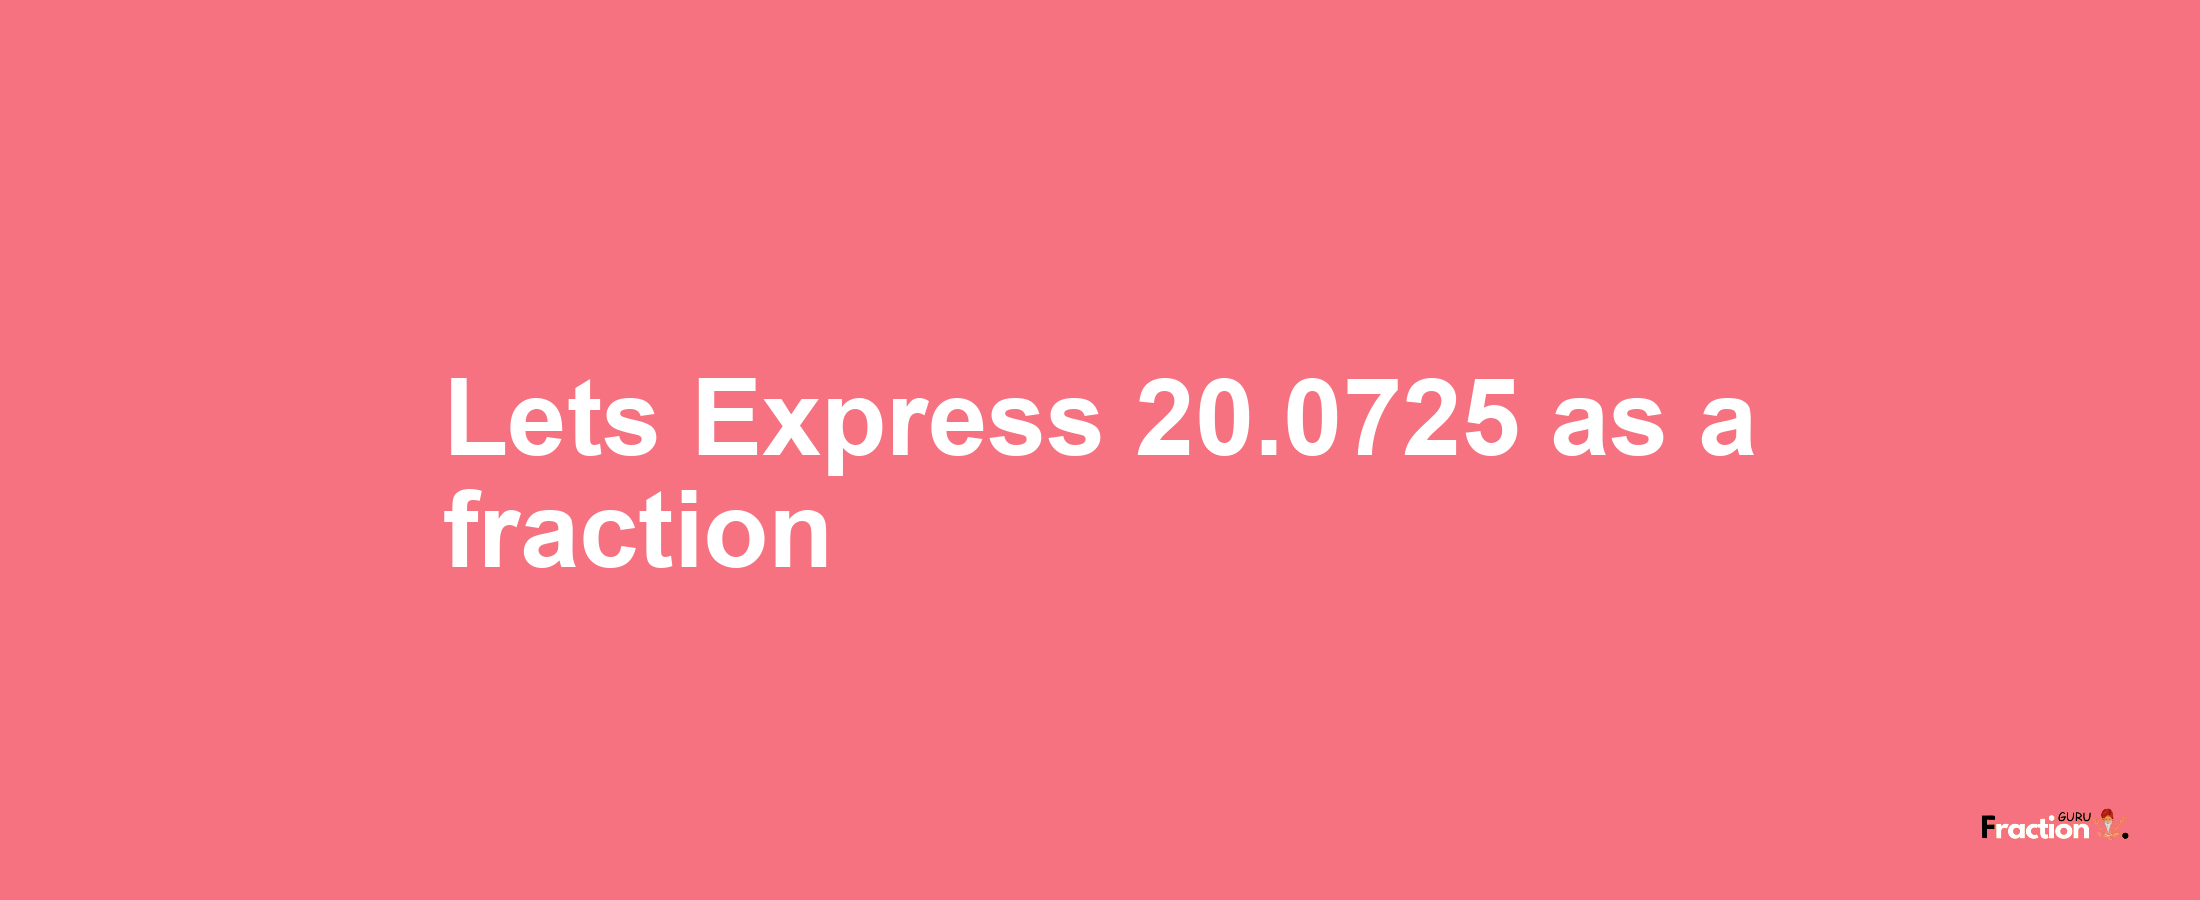 Lets Express 20.0725 as afraction